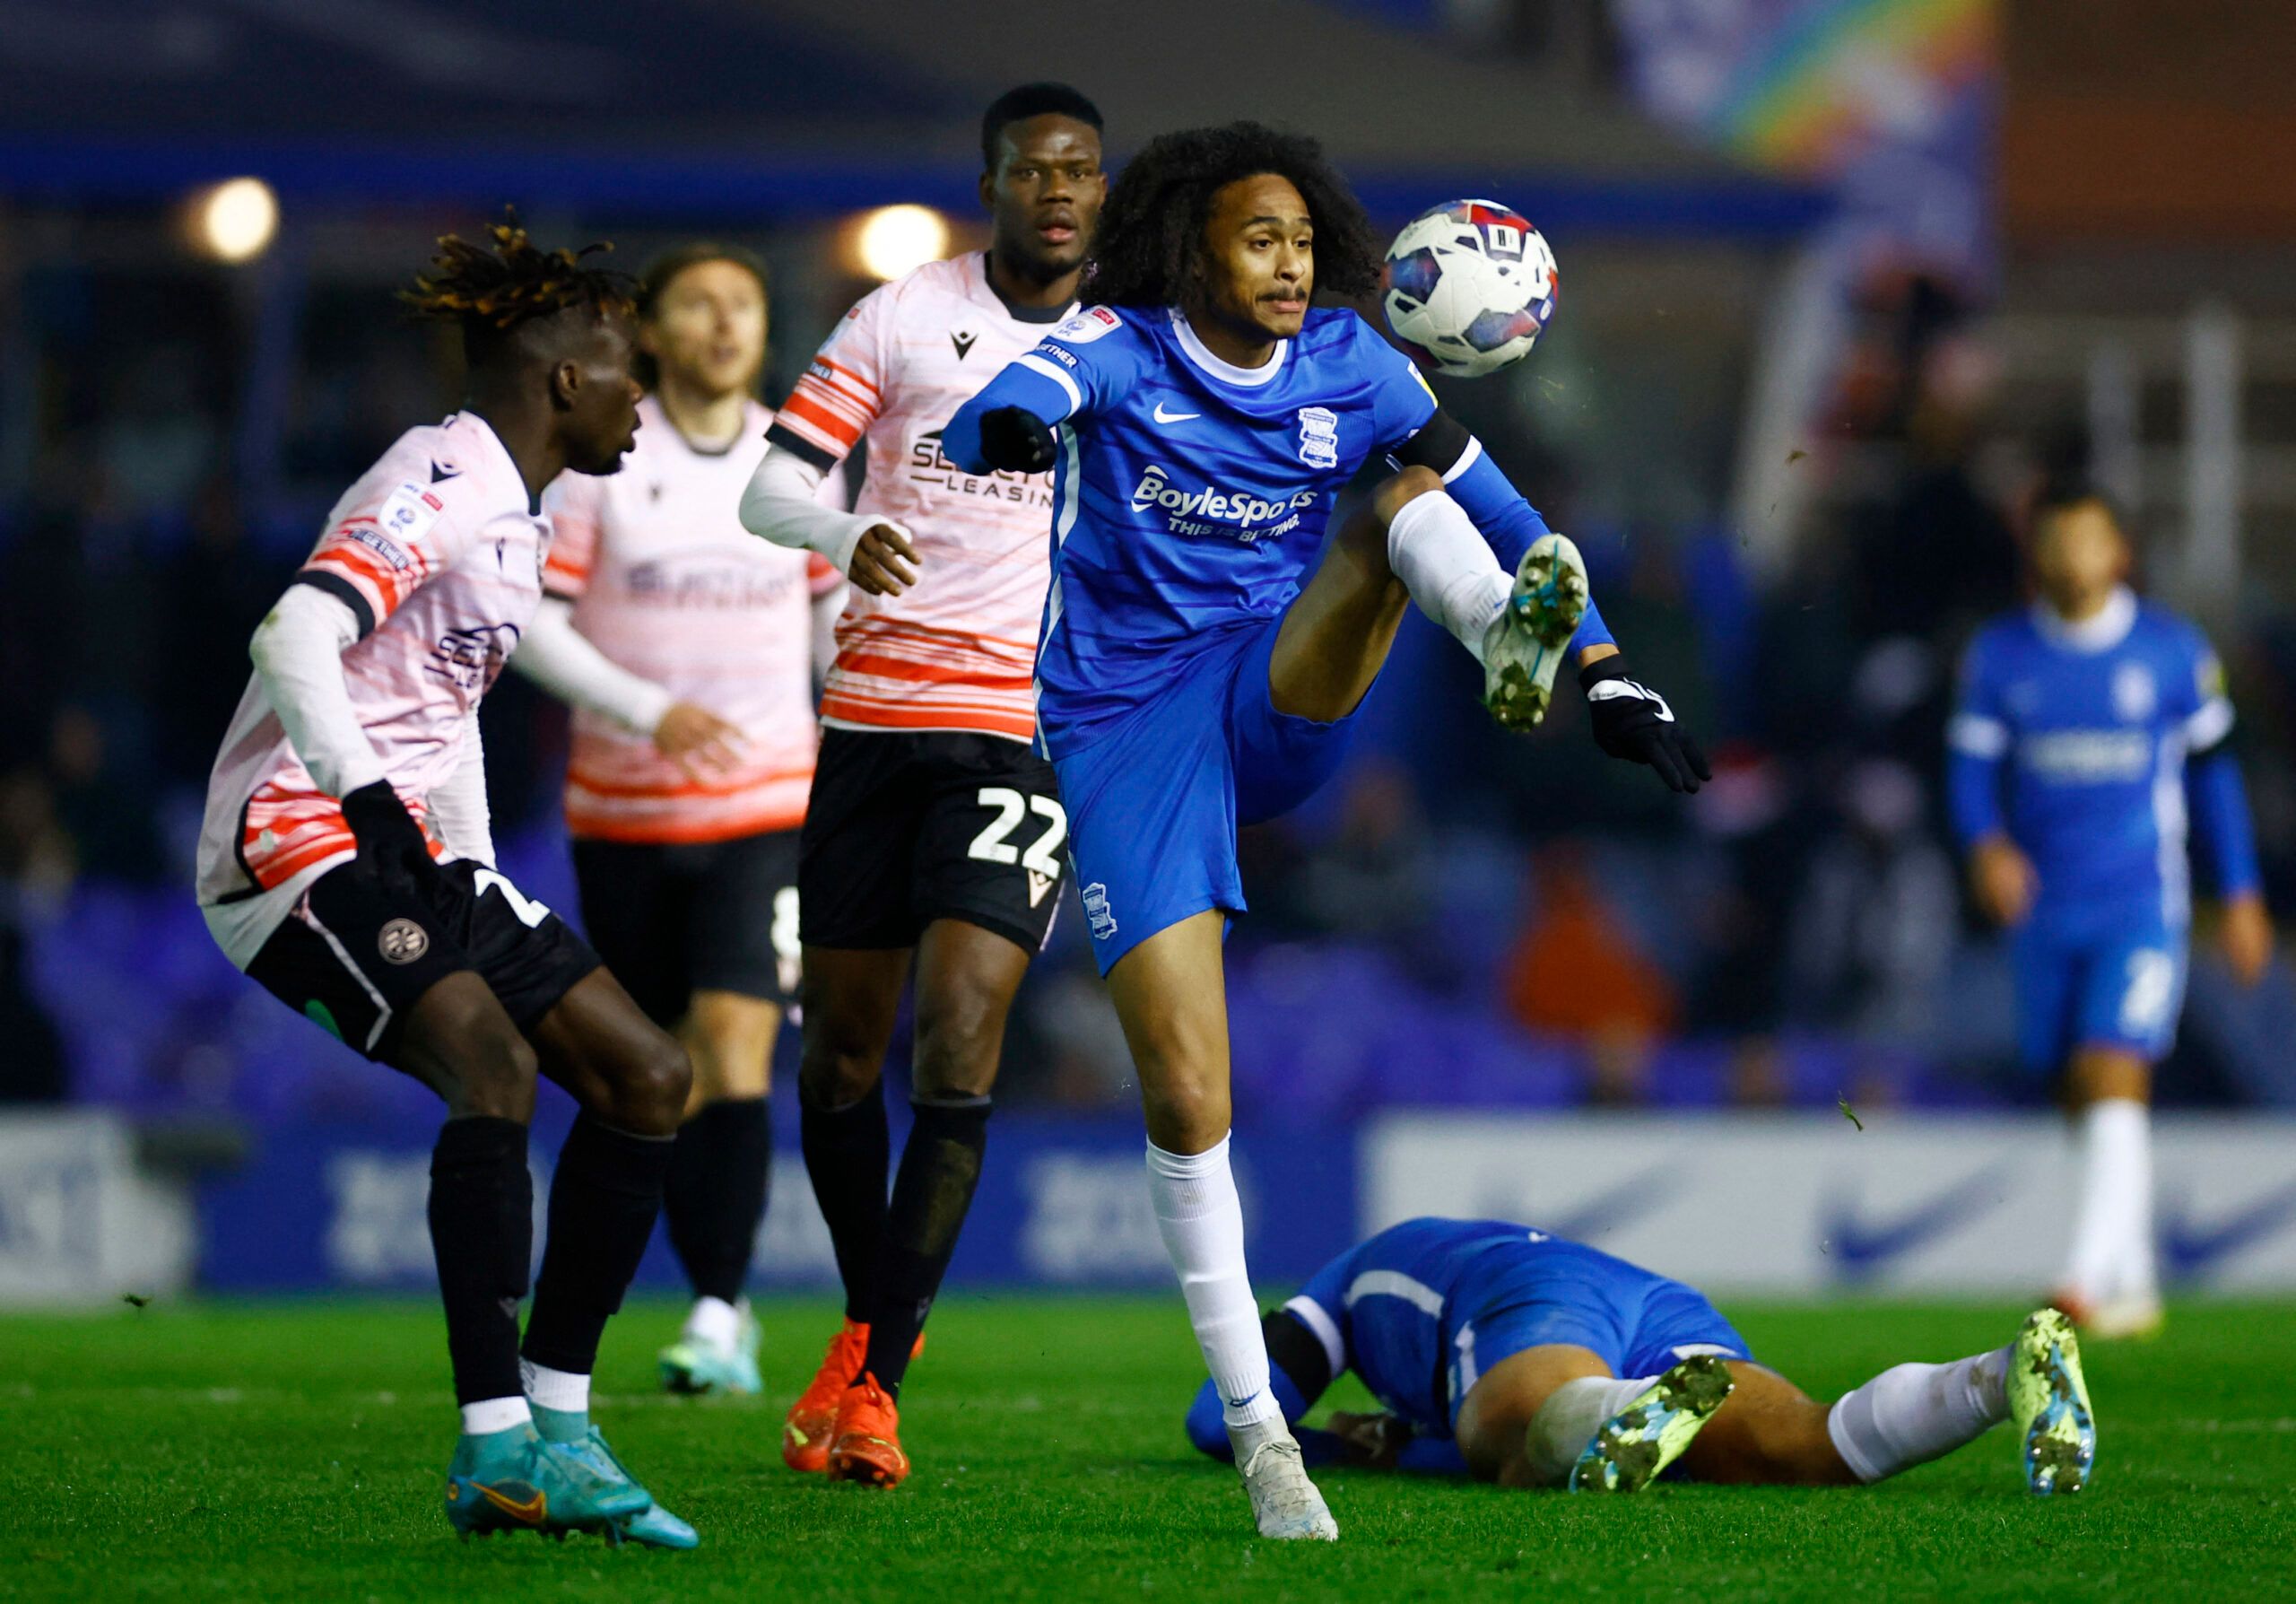 Soccer Football - Championship - Birmingham City v Reading - St Andrews, Birmingham, Britain - December 16, 2022 Birmingham City's Tahith Chong in action with Reading's Amadou Salif Mbengue Action Images/Andrew Boyers EDITORIAL USE ONLY. No use with unauthorized audio, video, data, fixture lists, club/league logos or 'live' services. Online in-match use limited to 75 images, no video emulation. No use in betting, games or single club /league/player publications.  Please contact your account repr